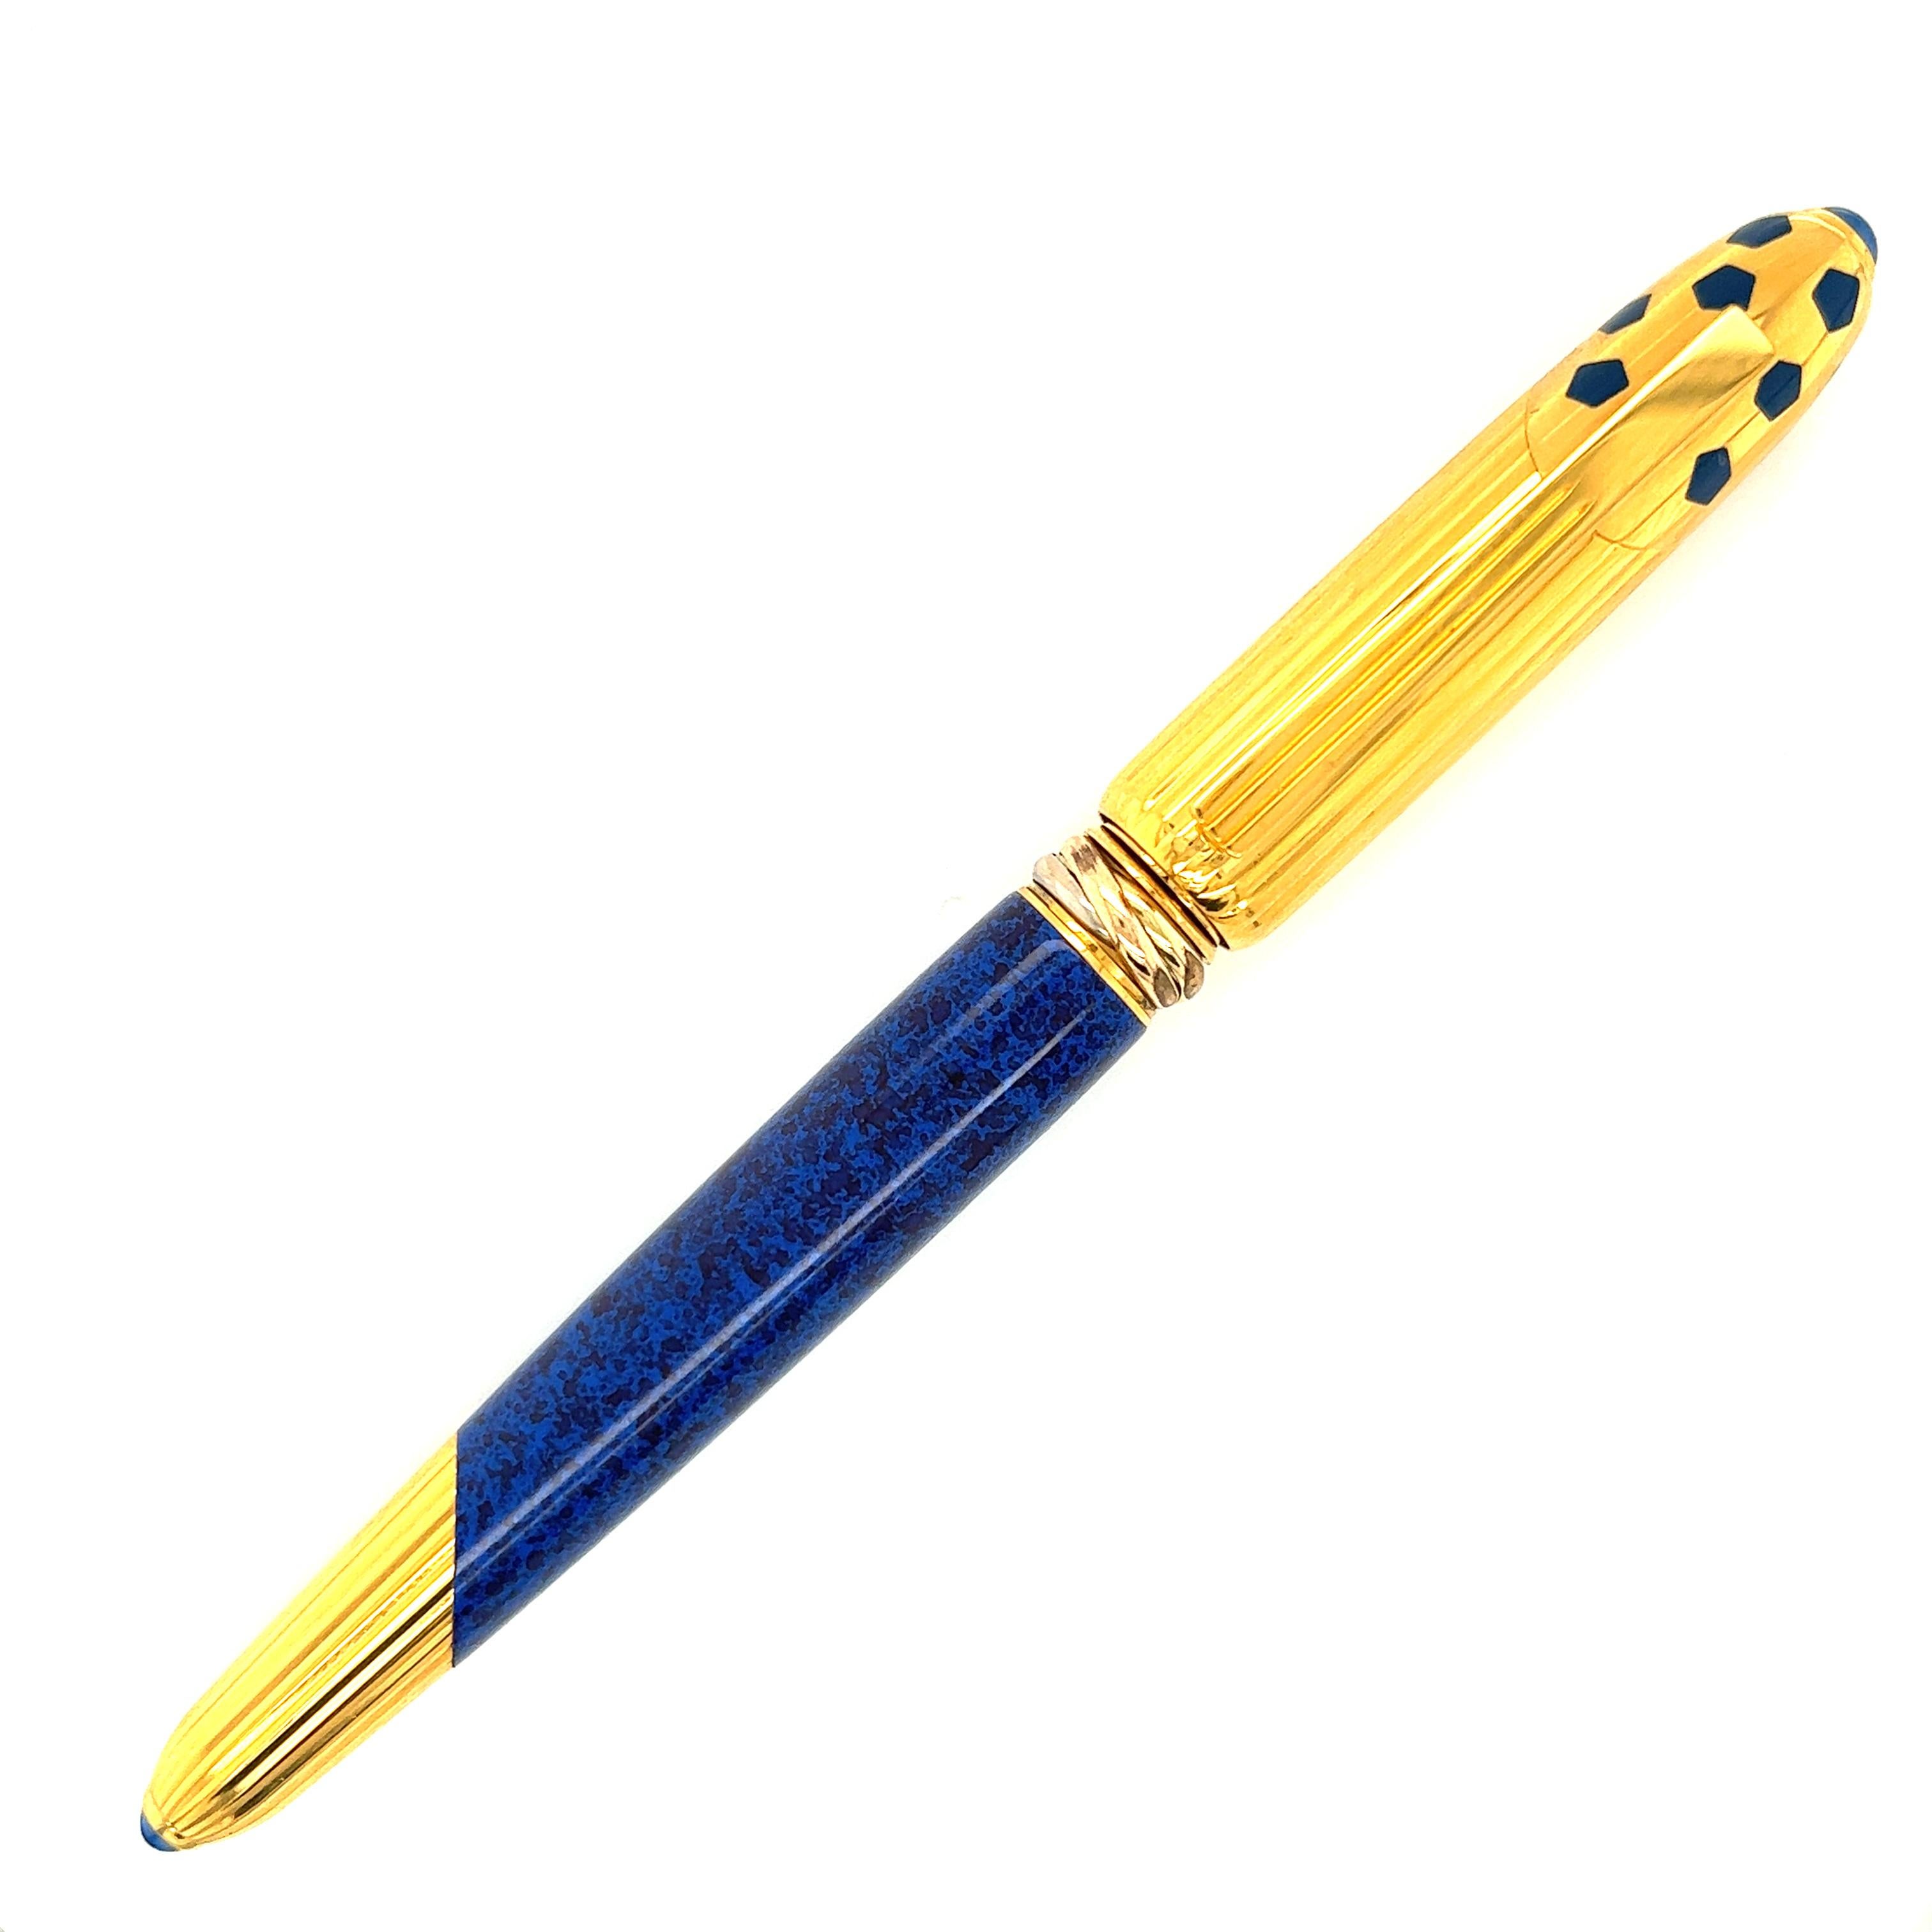 Gorgeous pen by famed designer Cartier. The pen is known as the 